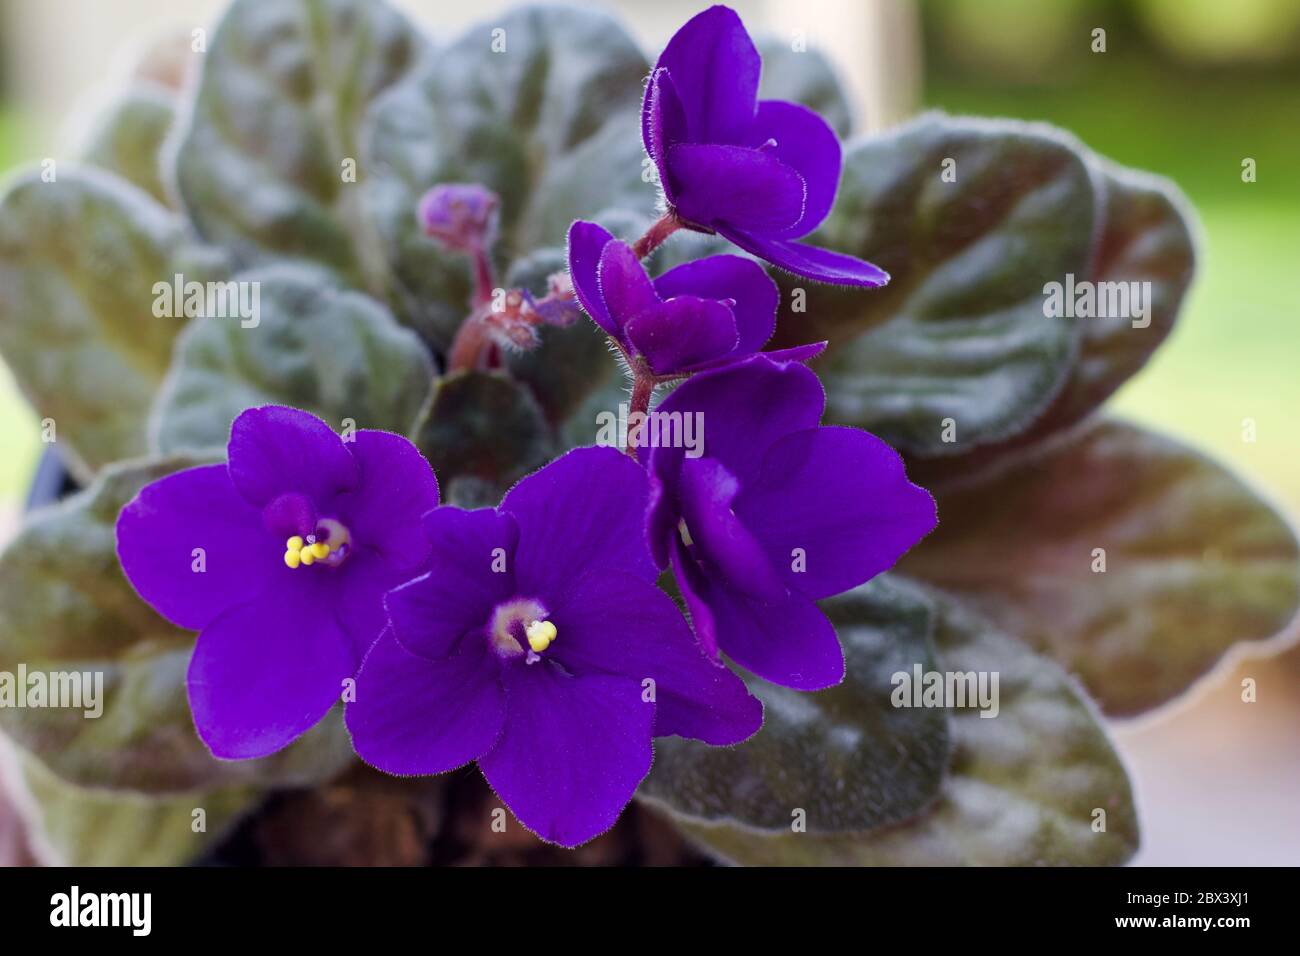 Close up view of a potted purple African violets plant (saintpaulia) with defocused background and copy space Stock Photo